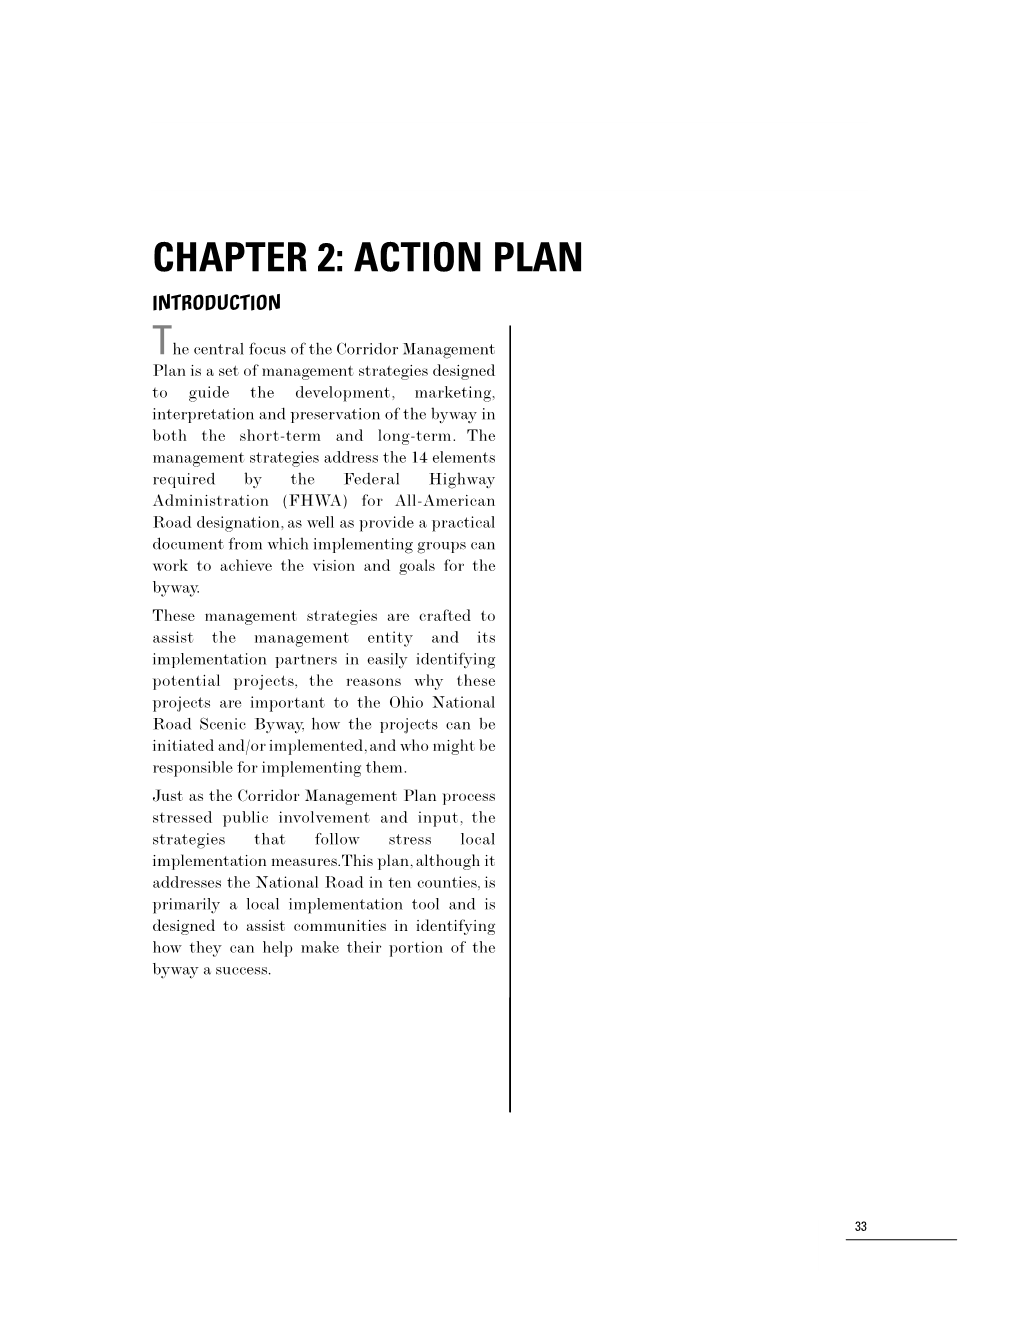 Chapter 2: Action Plan Introduction